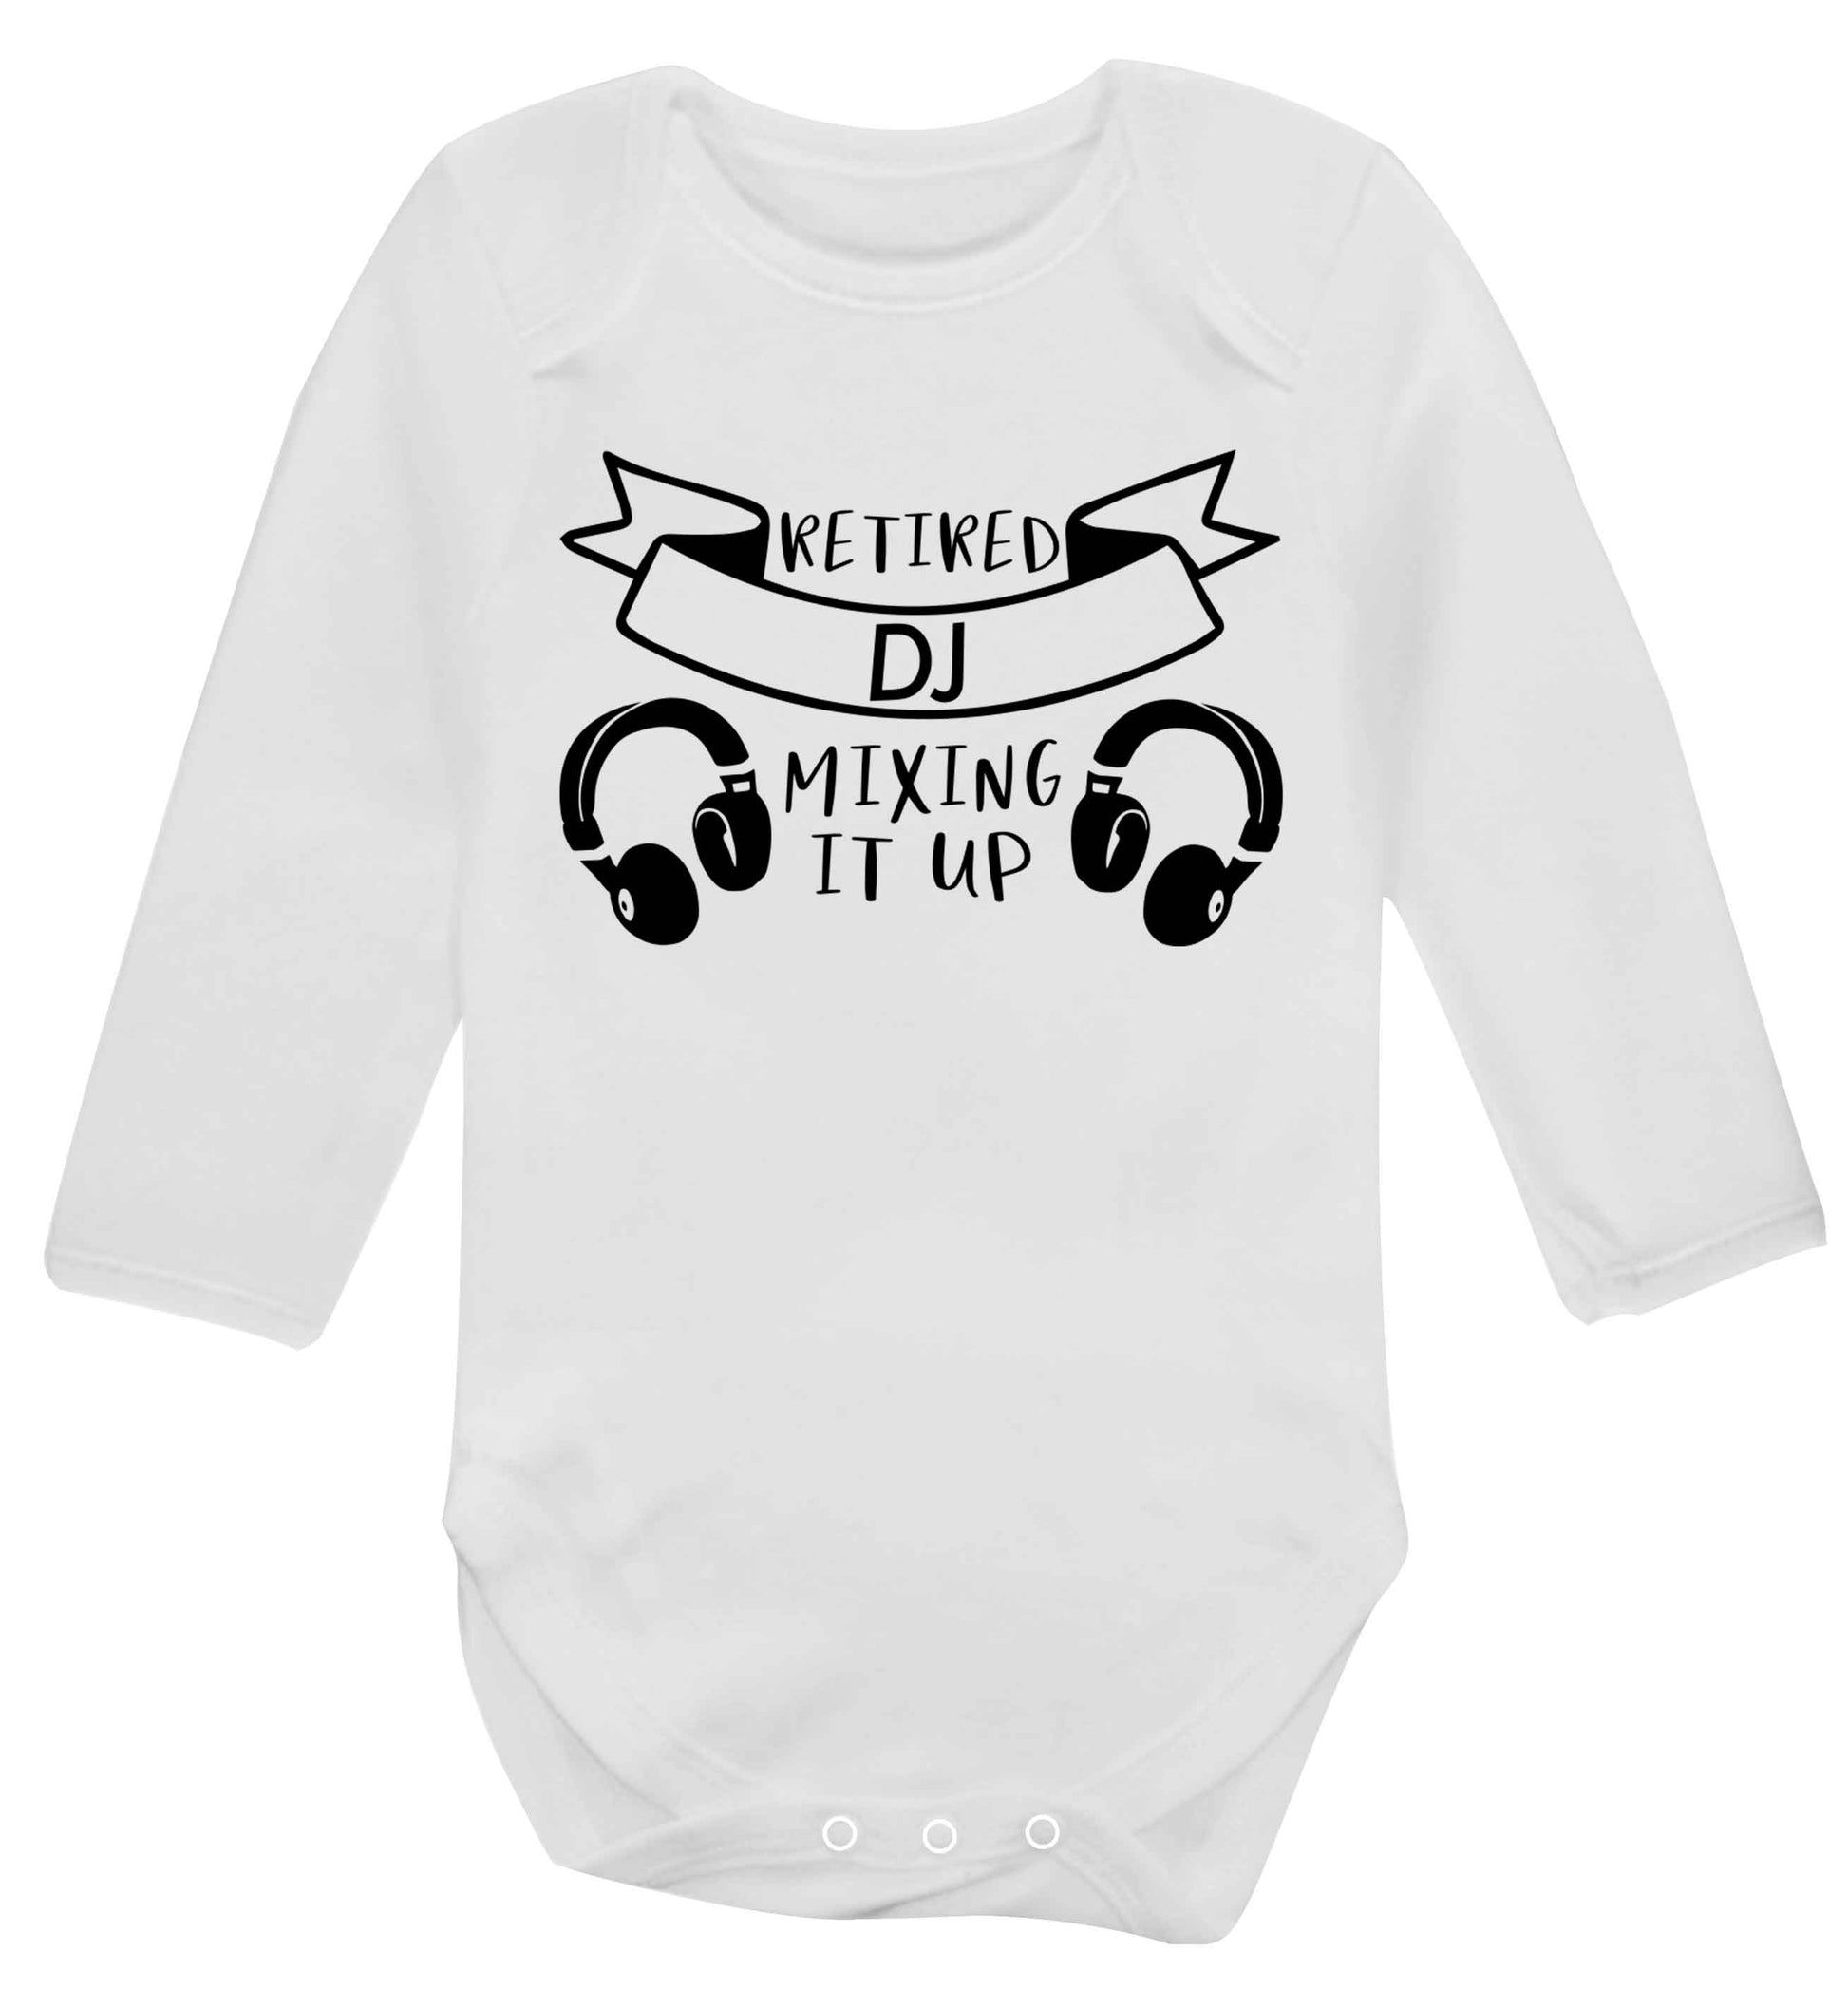 Retired DJ mixing it up Baby Vest long sleeved white 6-12 months